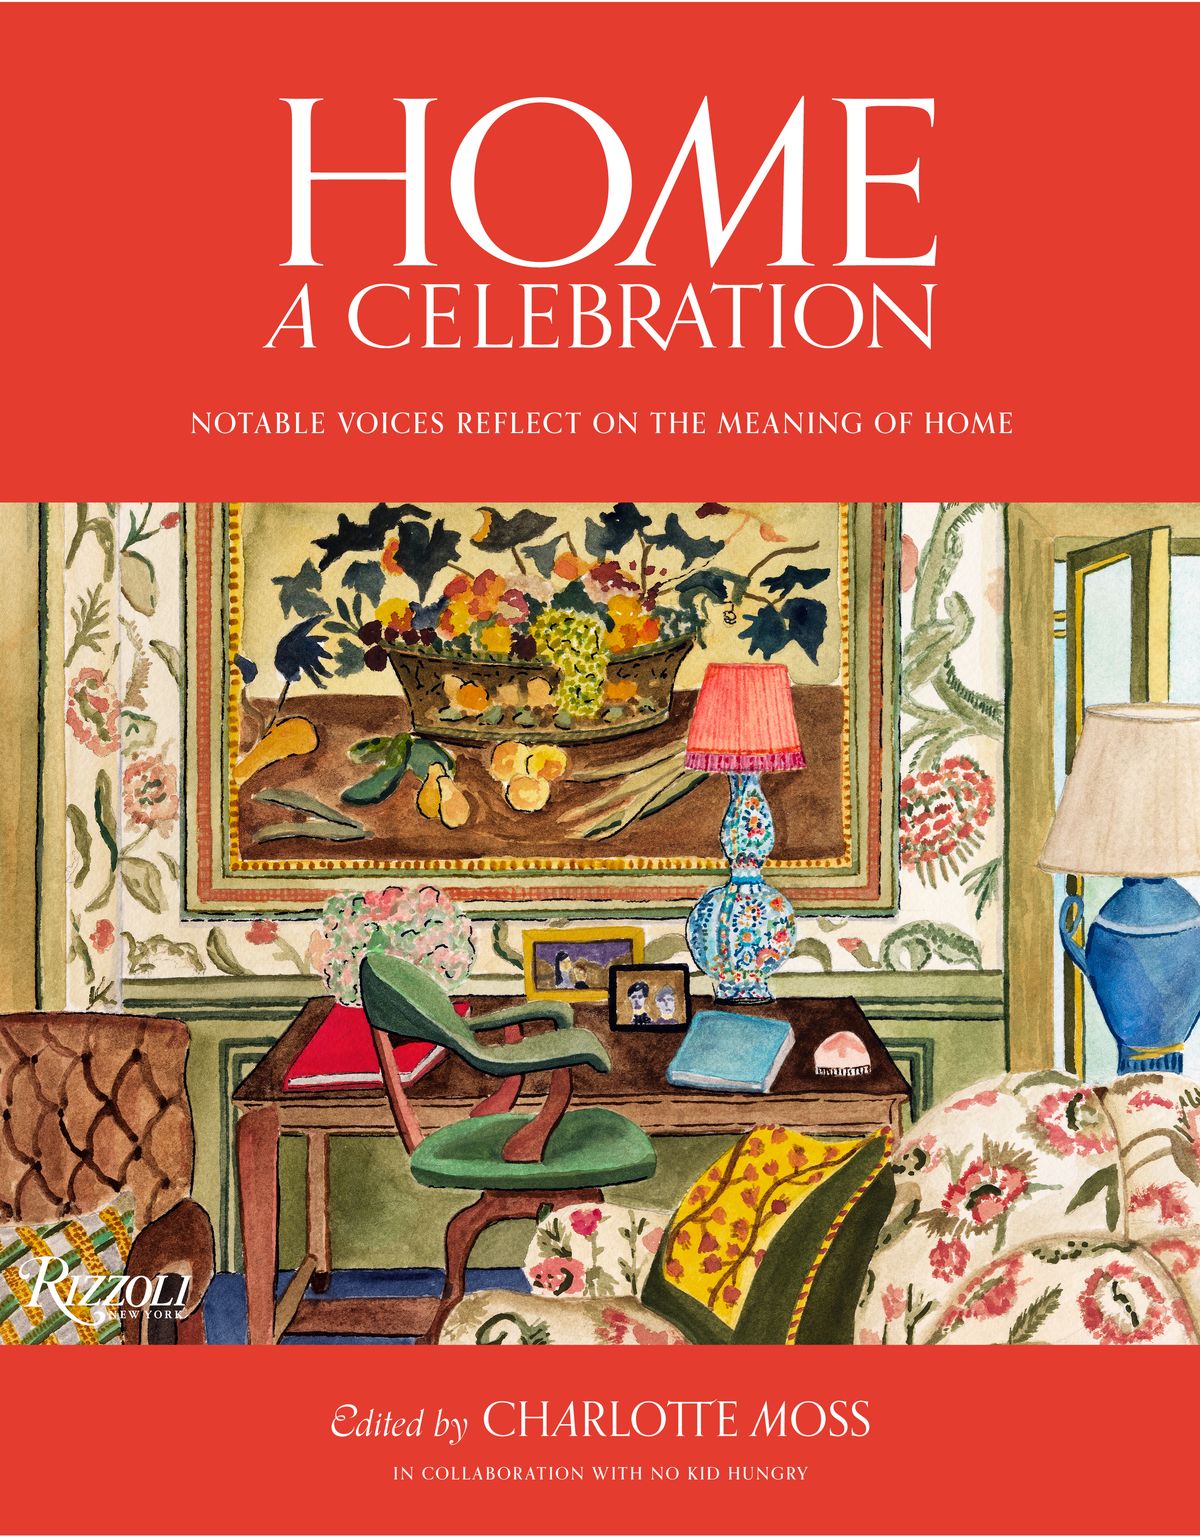 home a celebration notable voices reflect on the meaning of home by charlotte moss